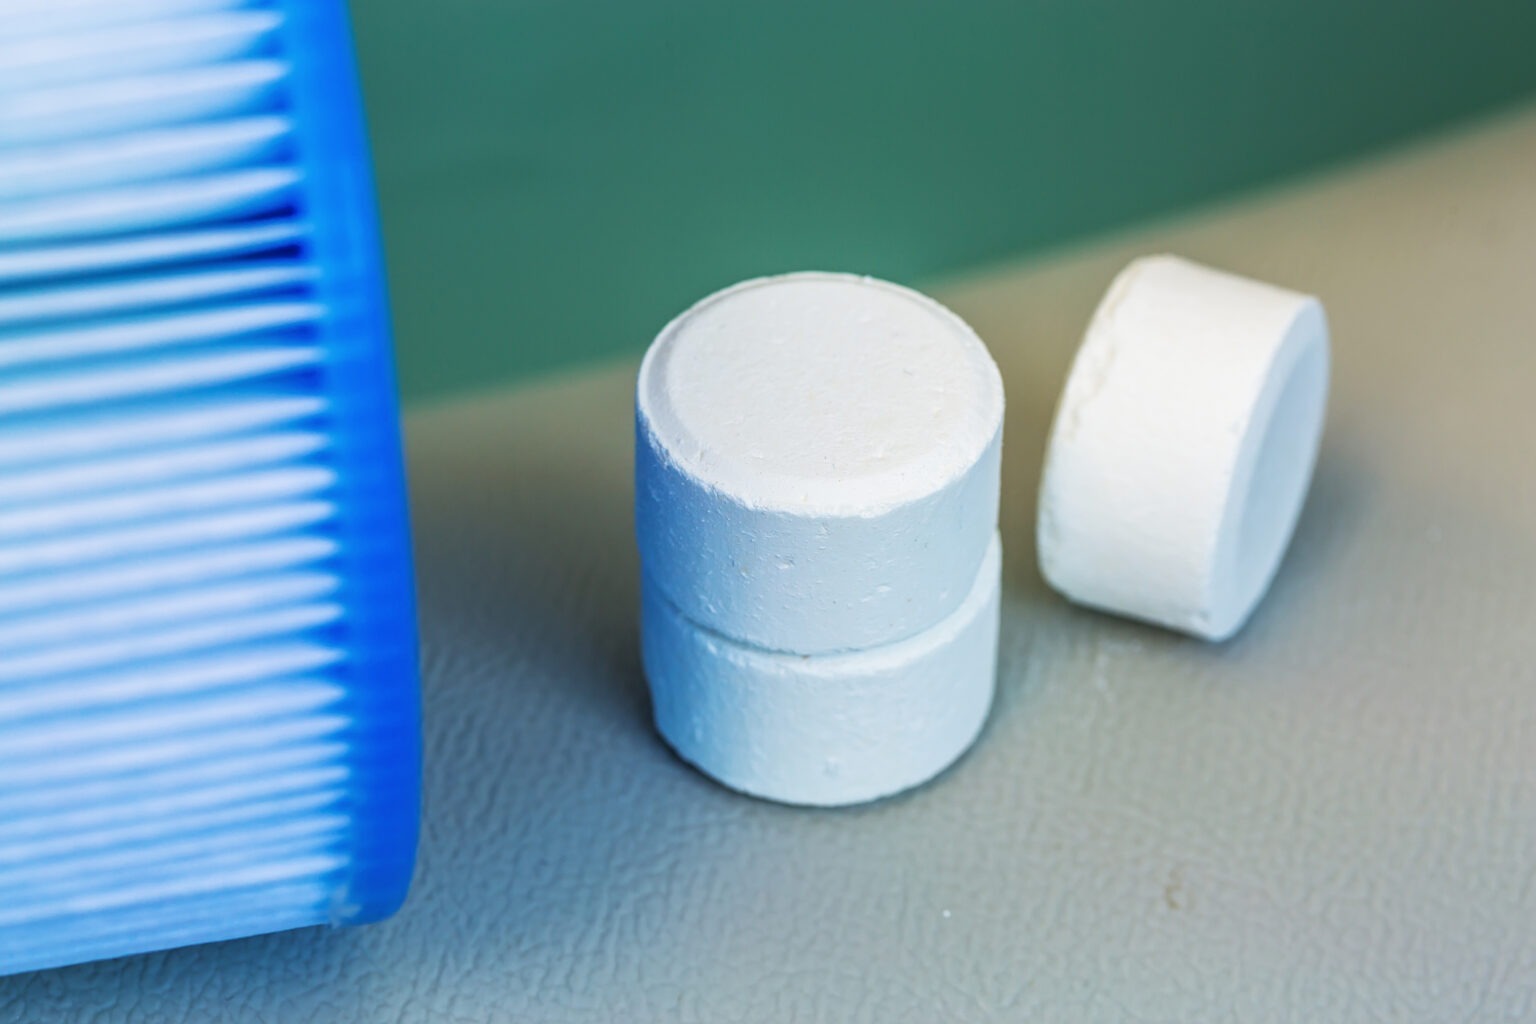 Chlorine tablets next to a pool and filter